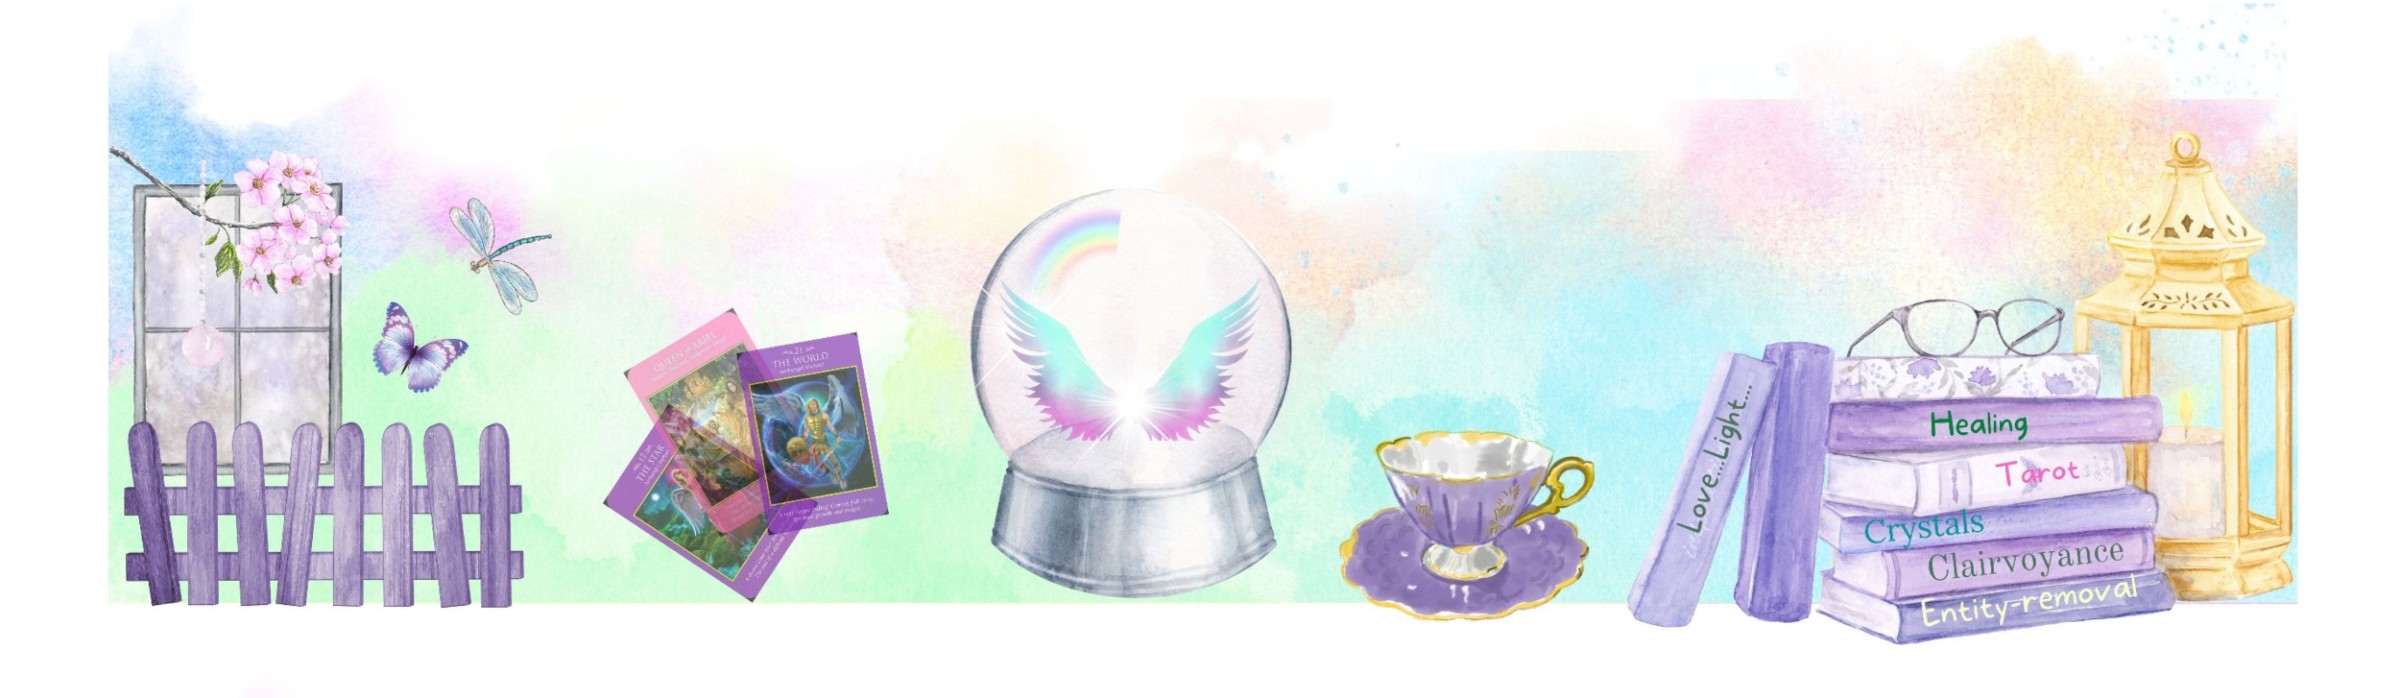 angel wings and a rainbow in a crystal ball next to tarot cards, a cup of tea, books and a pretty garden with picket fence